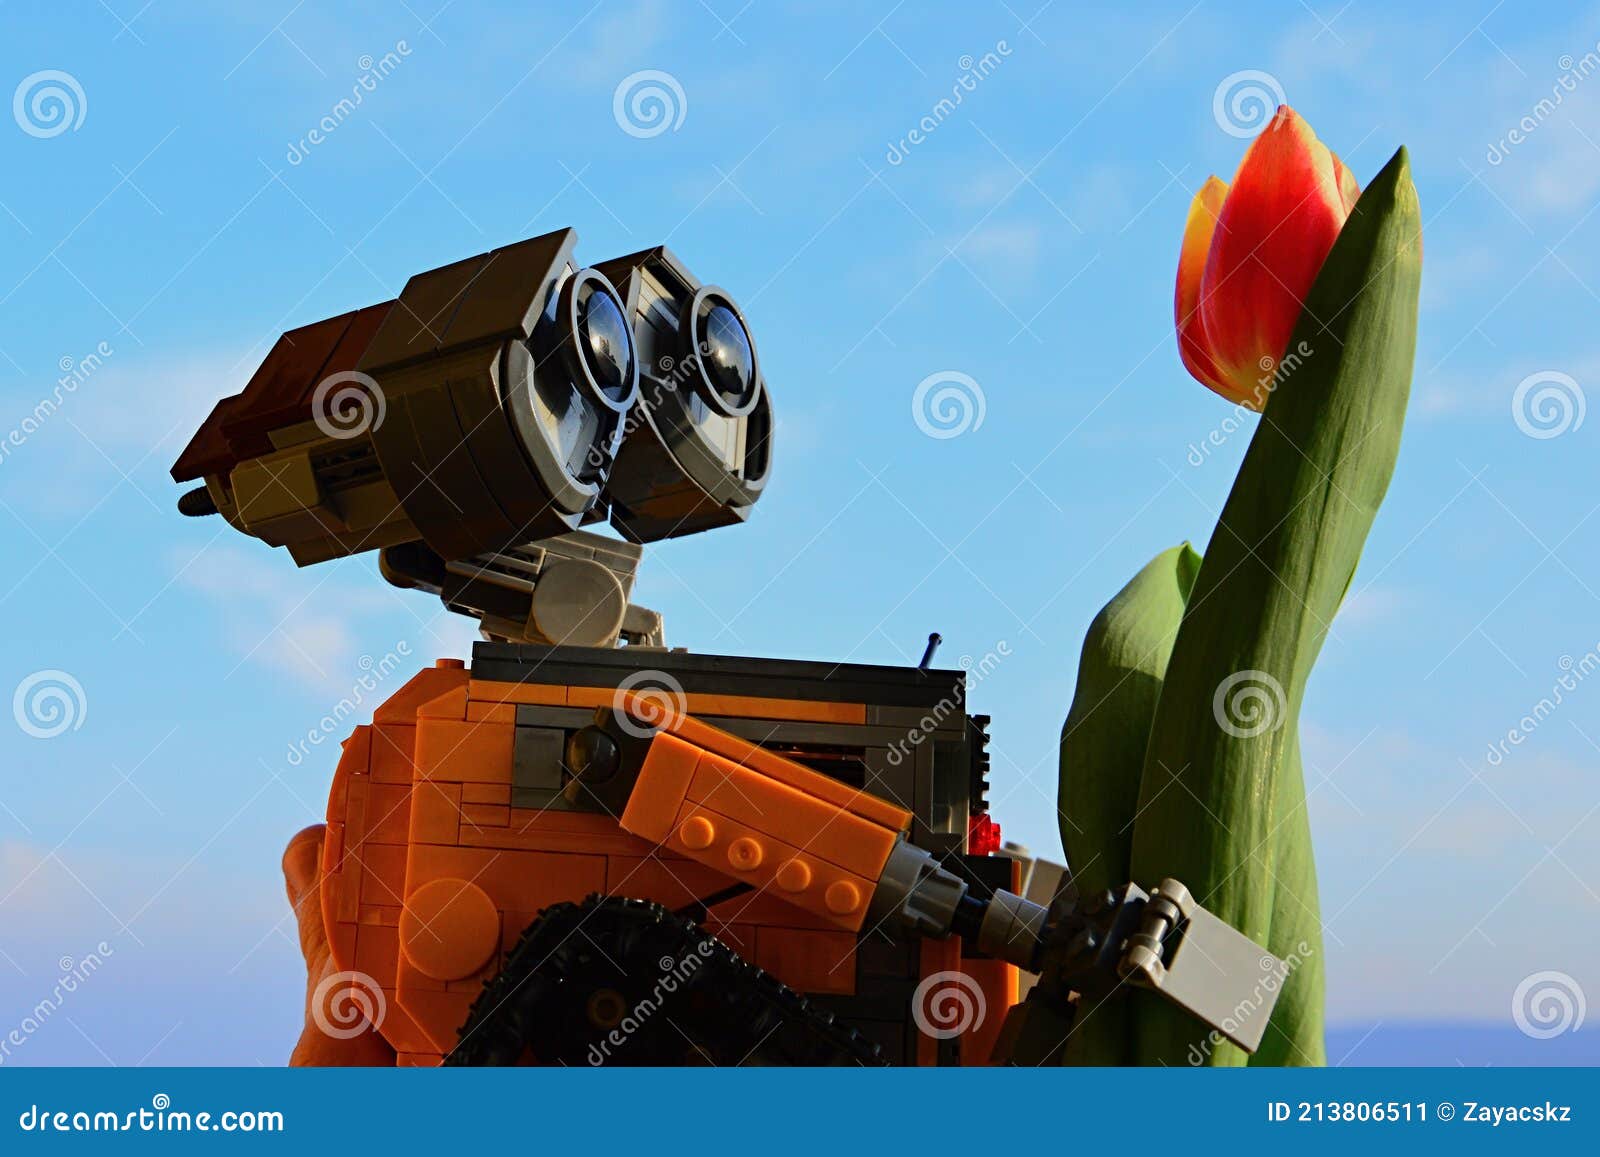 LEGO Wall-E Robot Figure from Pixar Animated Movie Holding Spring Orange To  Yellow Tulip Flower, Blue Skies in Background Editorial Photo - Image of  figure, symbol: 213806511